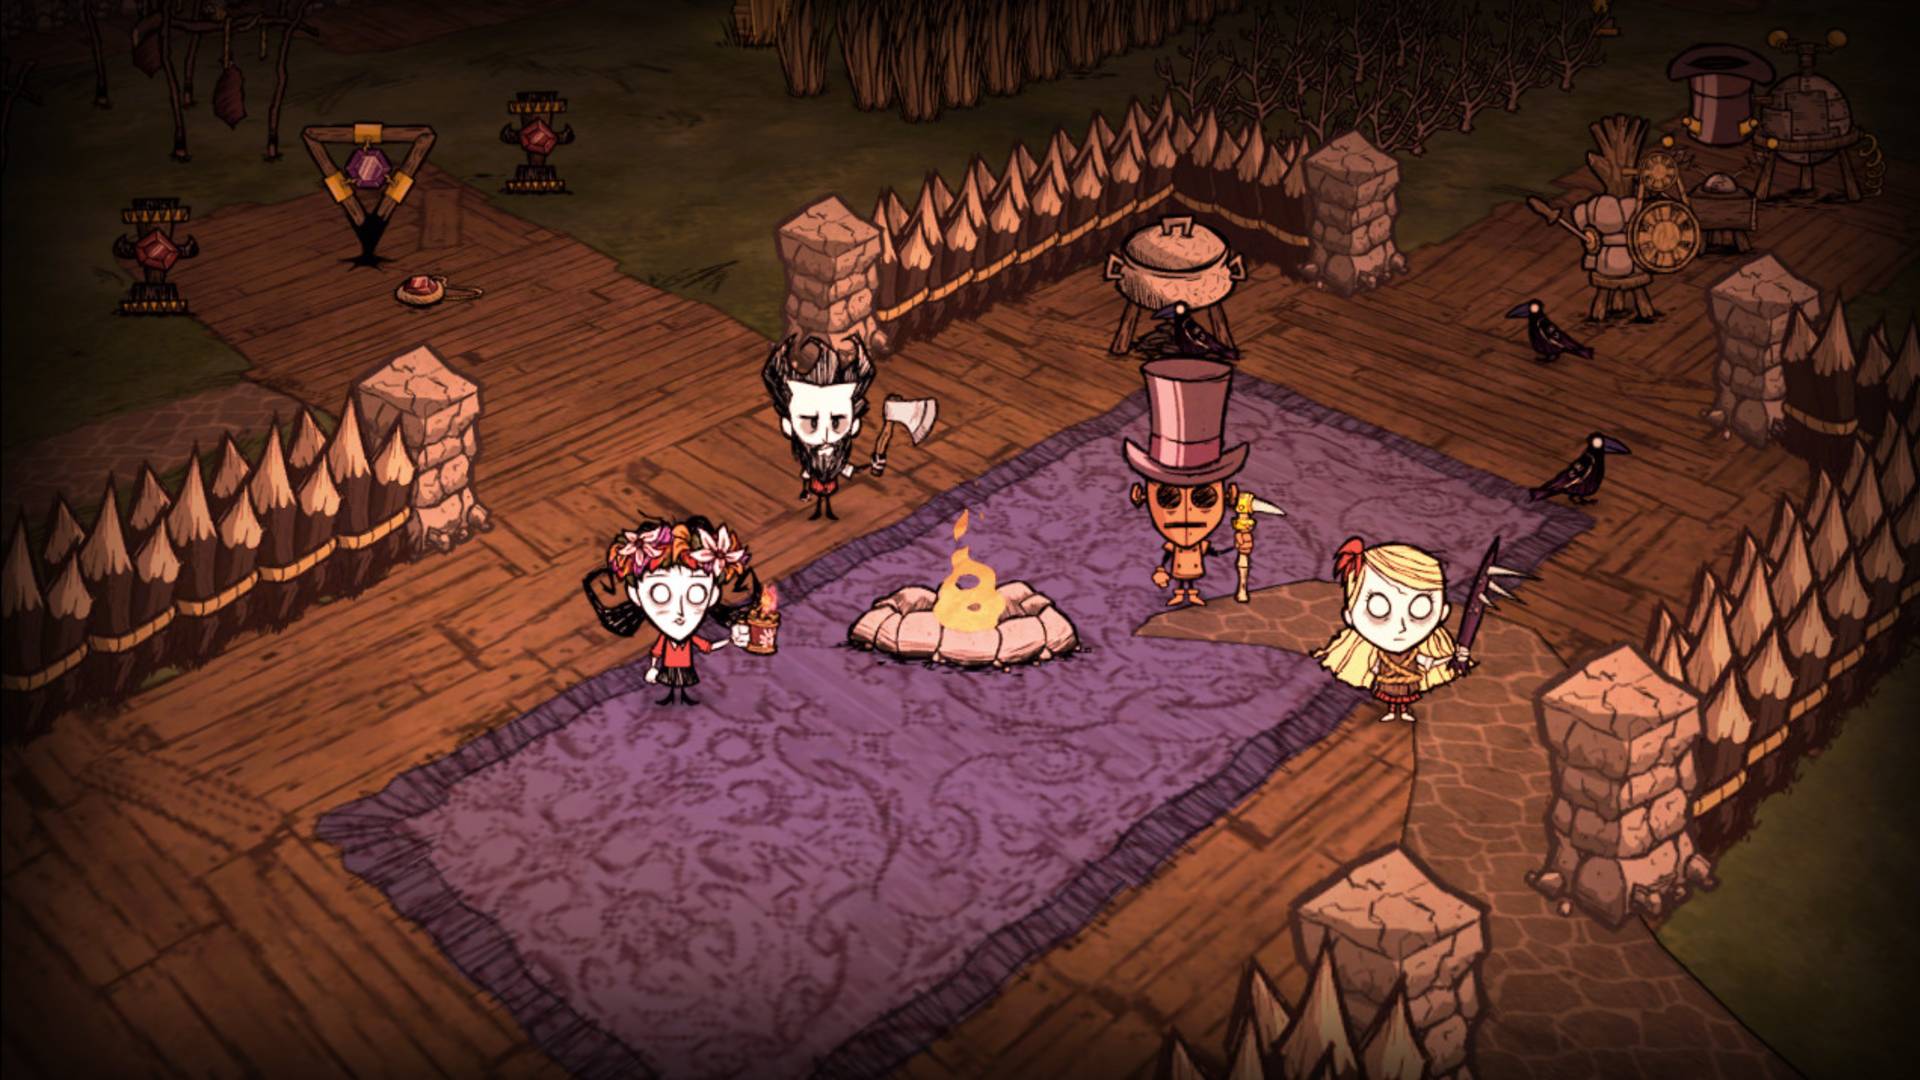 Best multiplayer games: Don't Starve Together. Image shows a group of characters in a wooden structure near a fire.